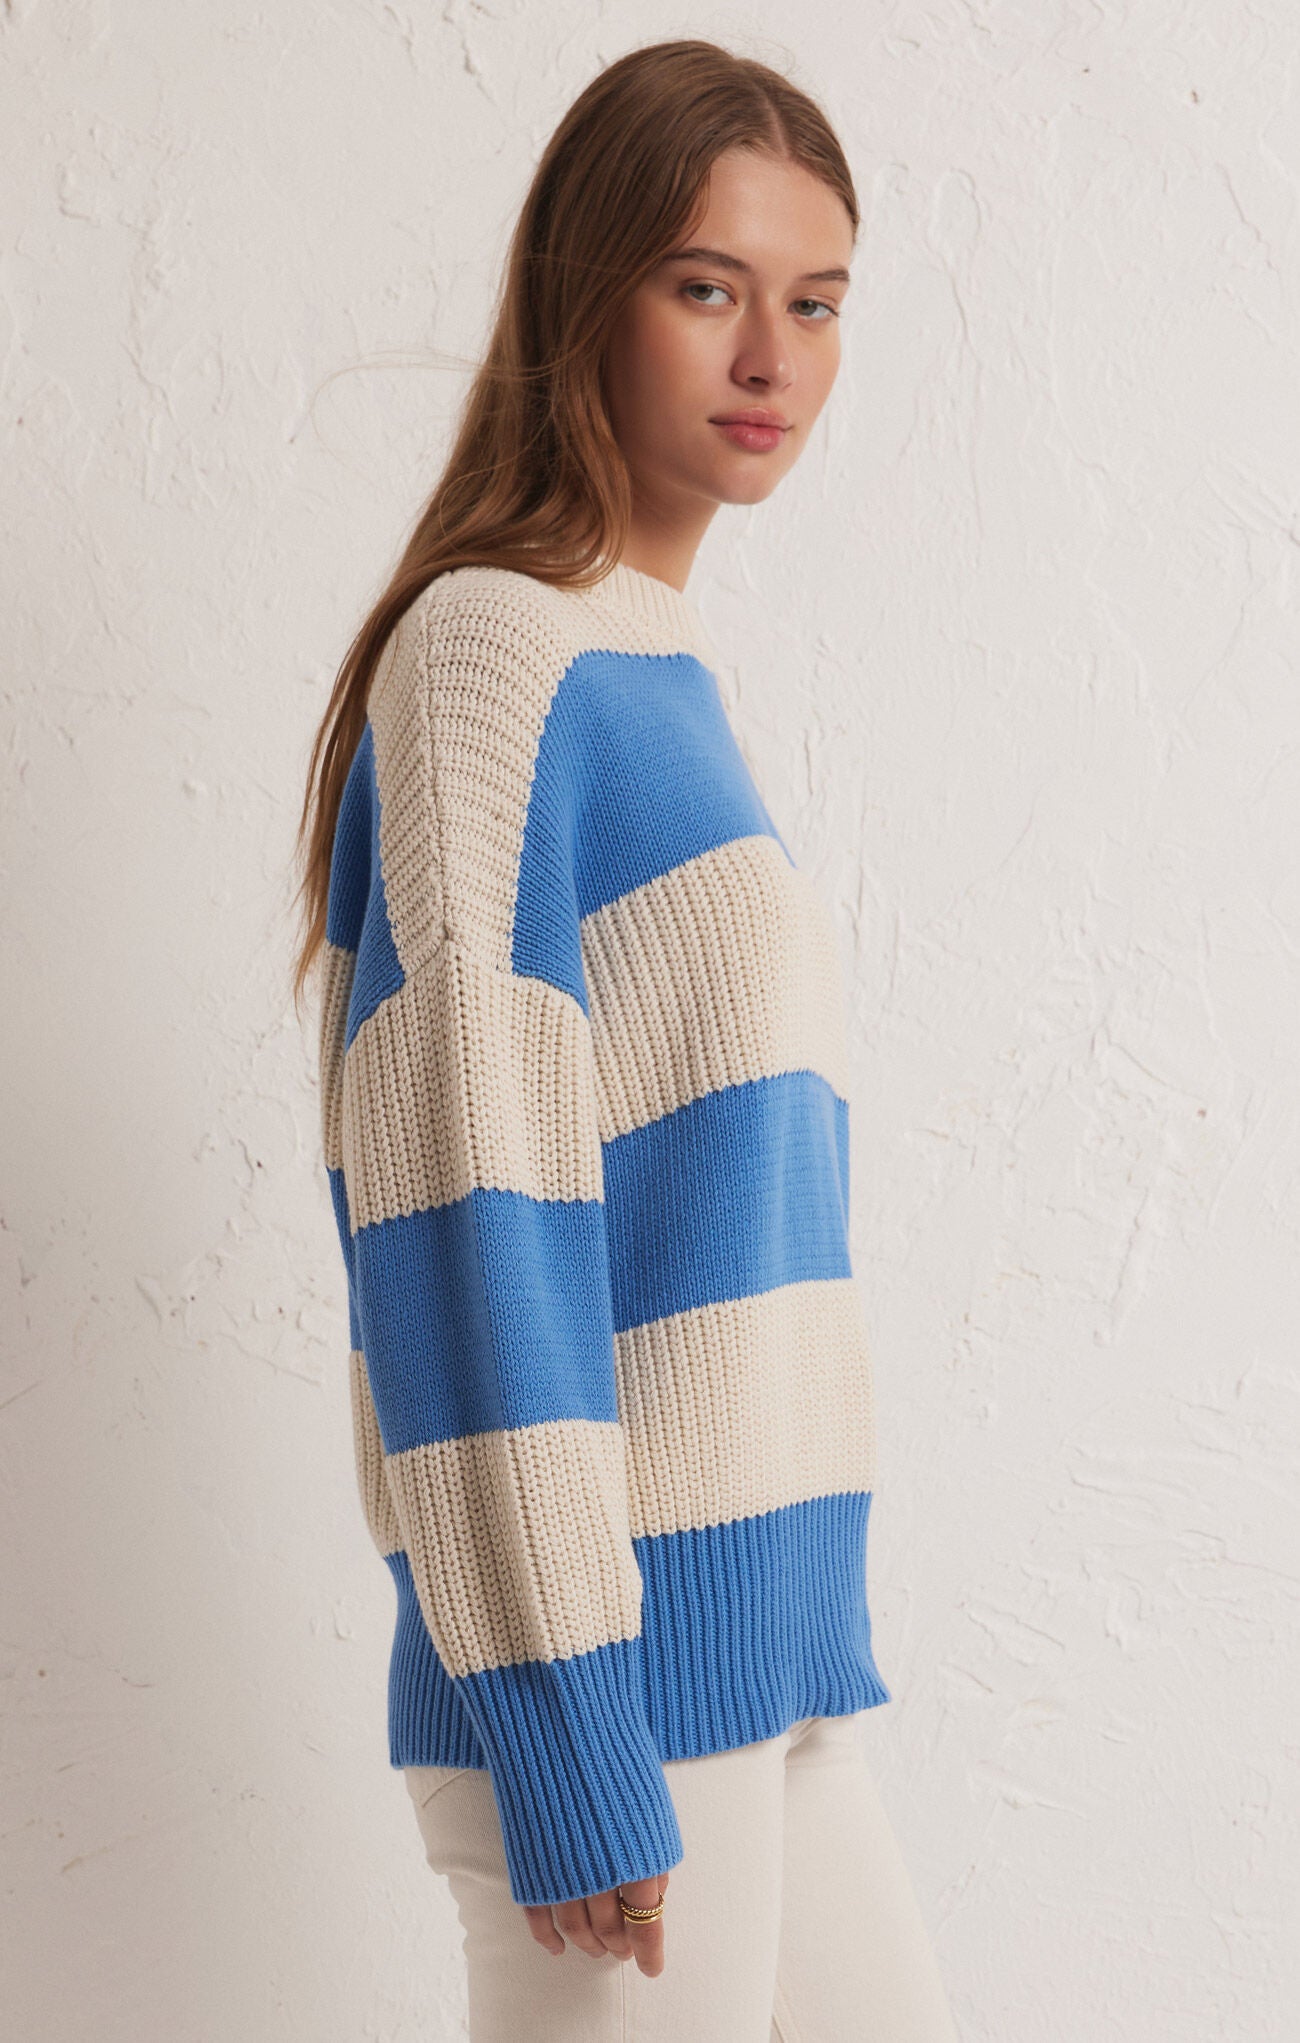 FRESCA STRIPE SWEATER-z-supply,blue isle,striped sweater,blue and cream,crew neckline,knitted,long sleeves